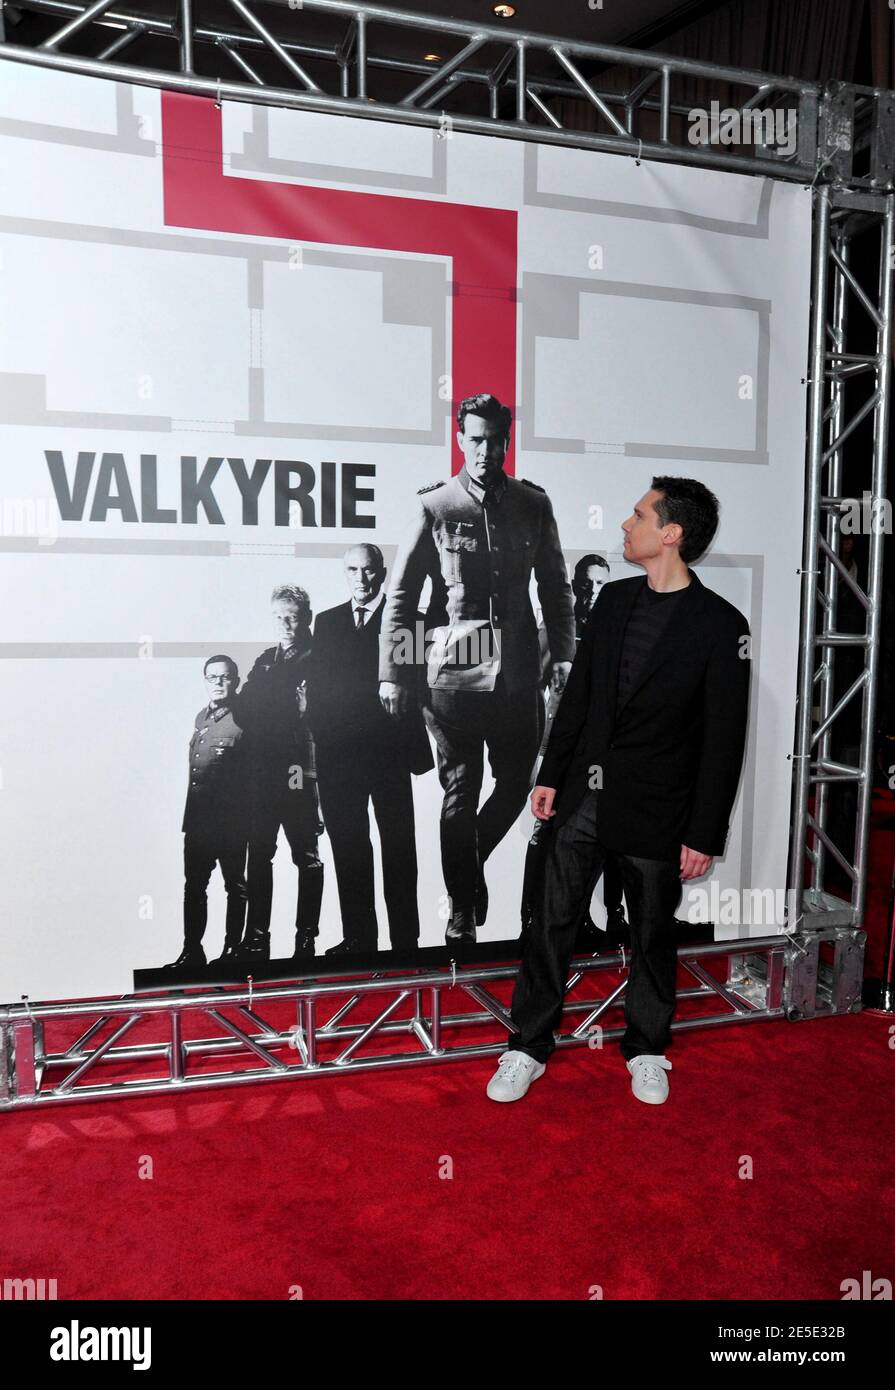 Director Bryan Singer arriving for the premiere of 'Valkyrie' at Rose Hall, Time Warner Center in New York City, NY, USA on December 15, 2008. Photo by Gregorio Binuya/ABACAPRESS.COM Stock Photo